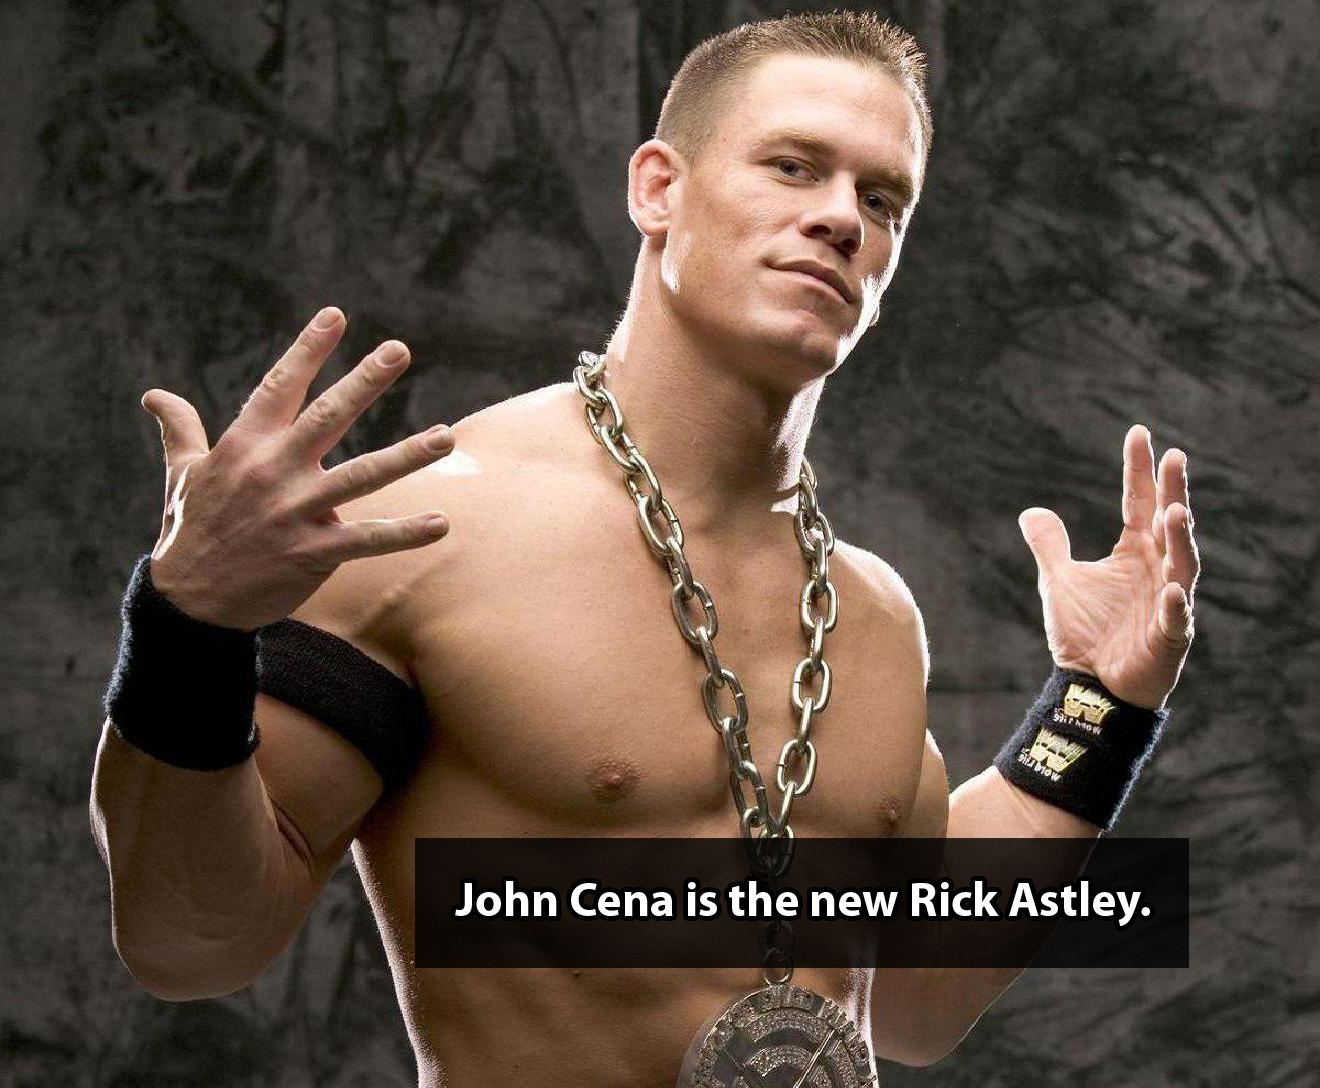 shower thought john cena image download - John Cena is the new Rick Astley.